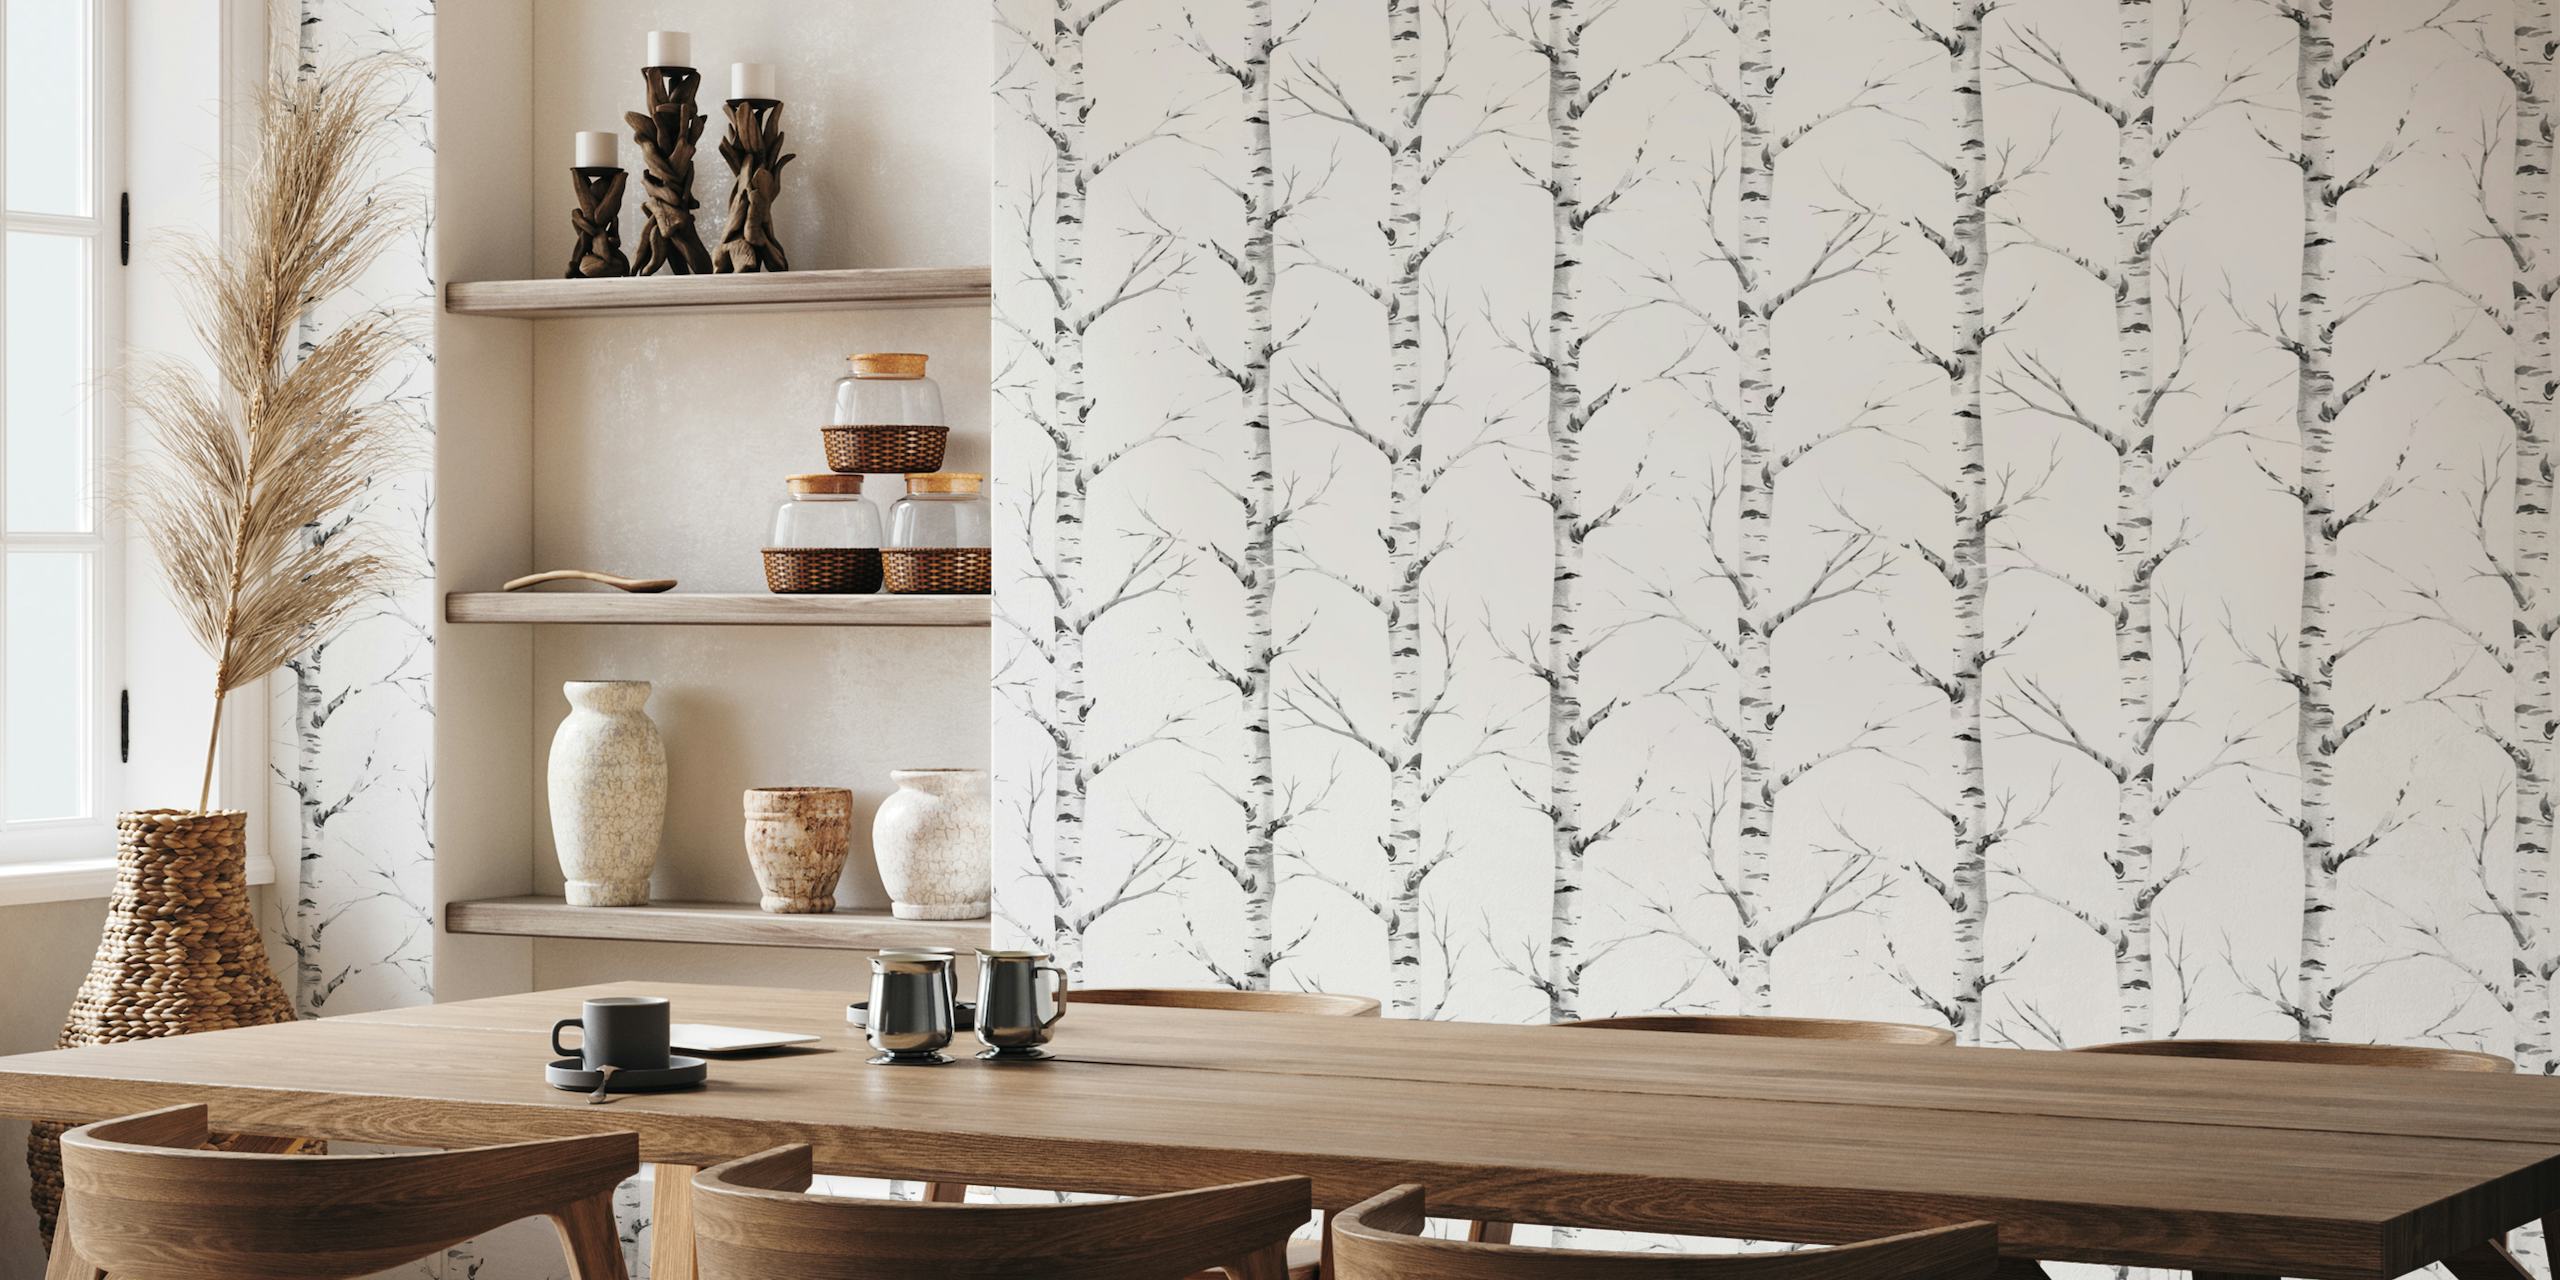 Black and white birch tree forest wall mural